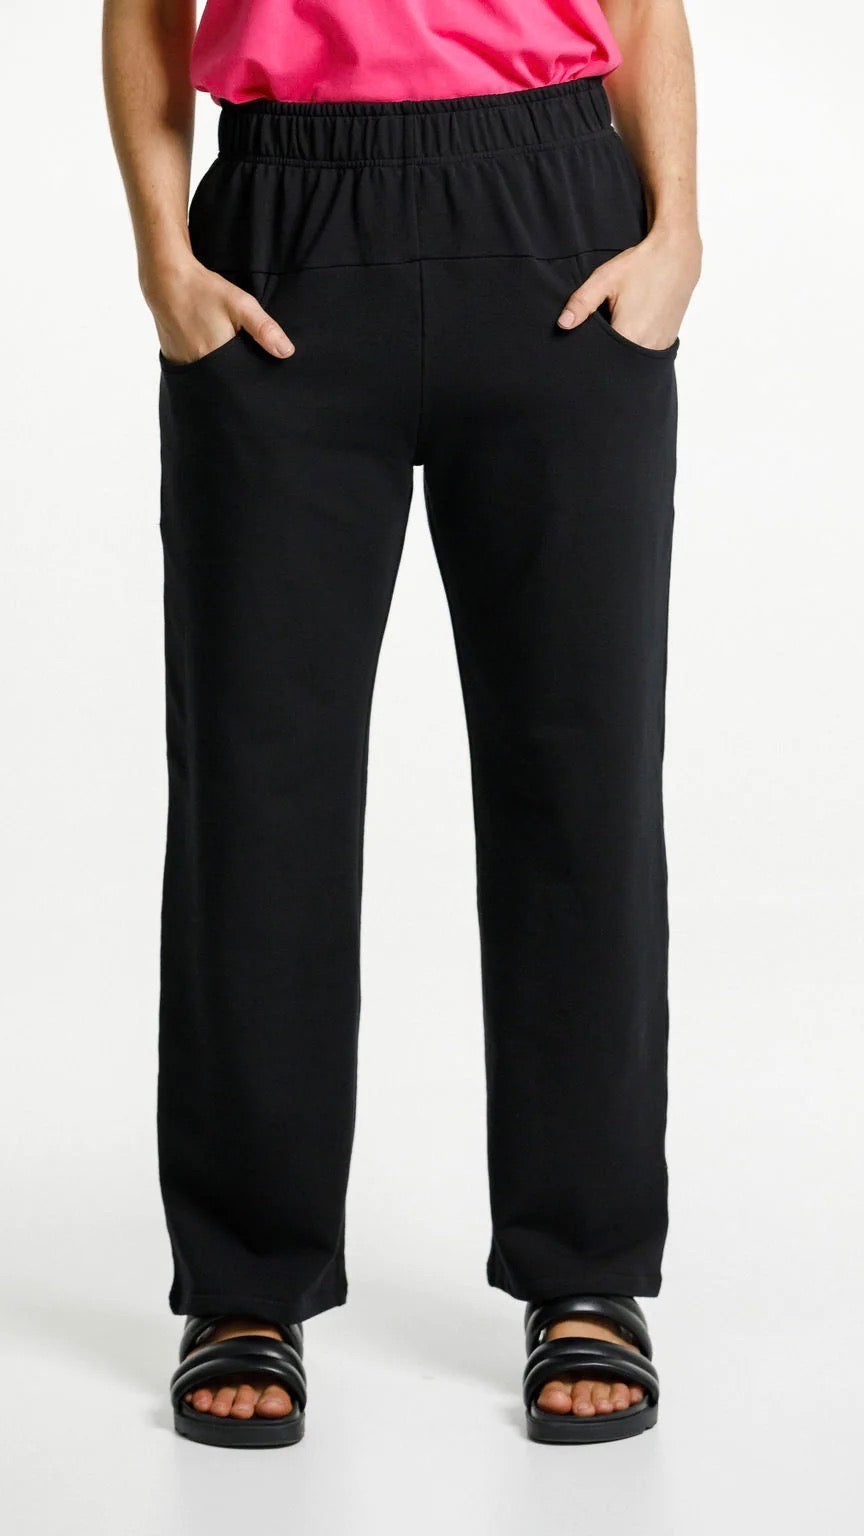 Avenue Pants Winter Weight Black with Matte Black X